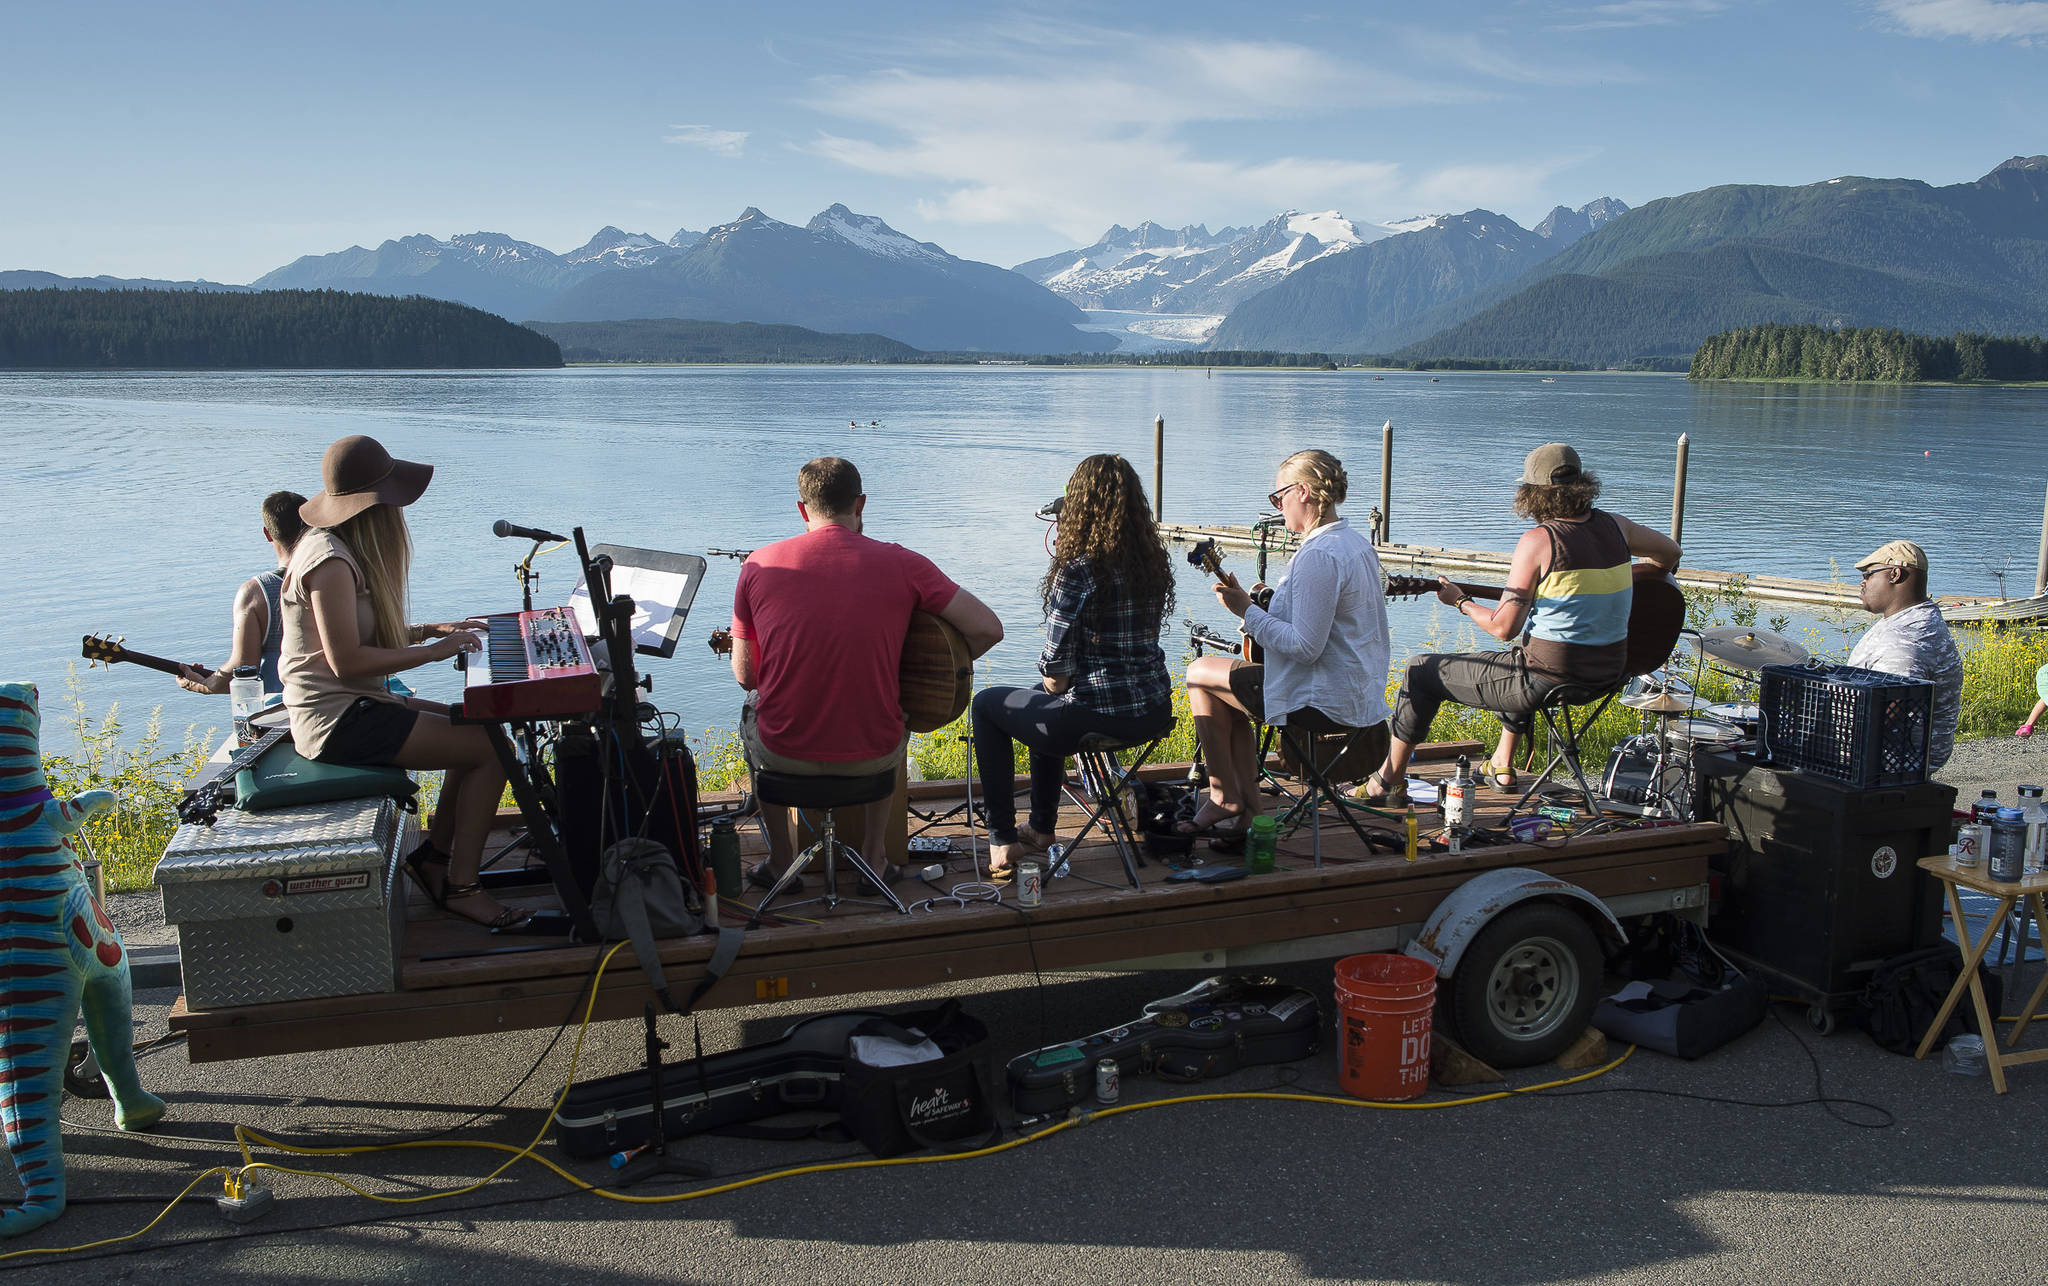 Juneau residents listen to the music of Papertrails and enjoy the beach during a solstice party at the North Douglas Boat Launch on Wednesday, June 20, 2018. (Michael Penn | Juneau Empire)